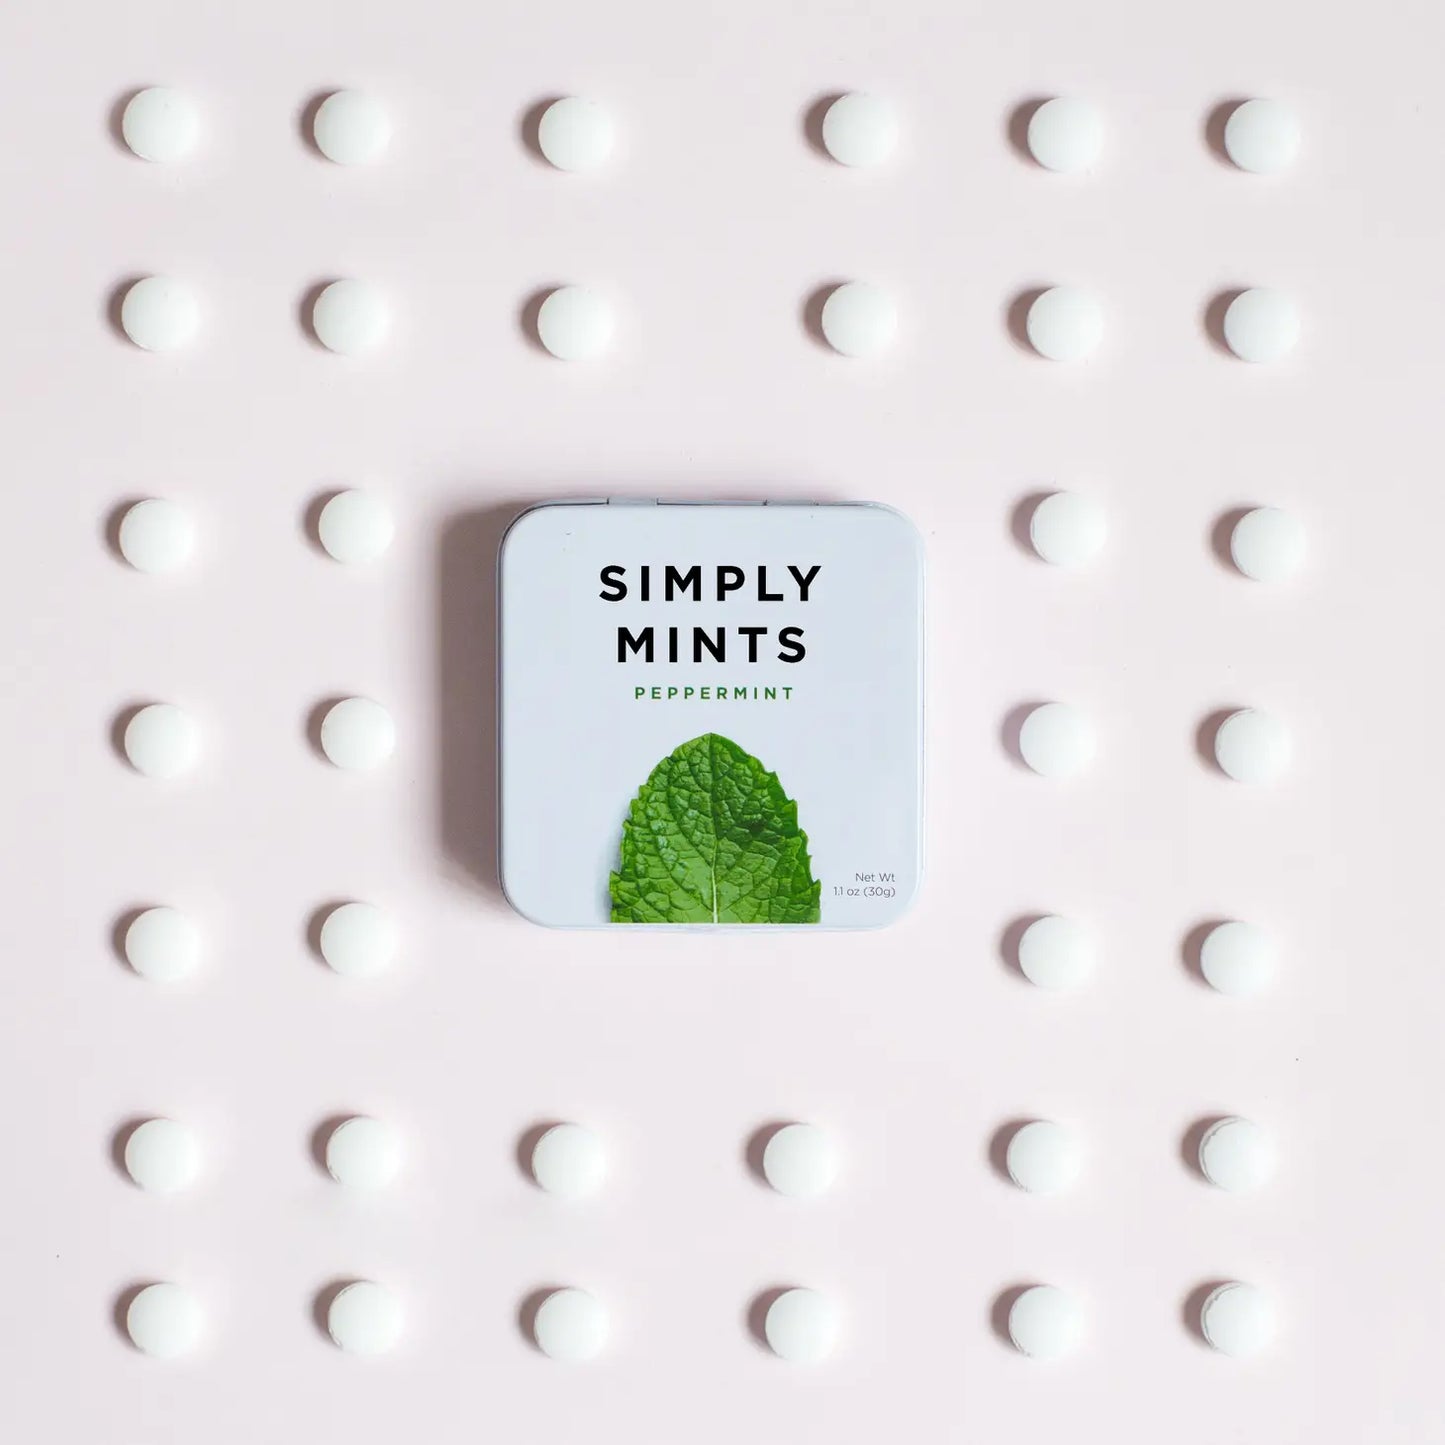 Simply | Mints: Peppermint (30g)